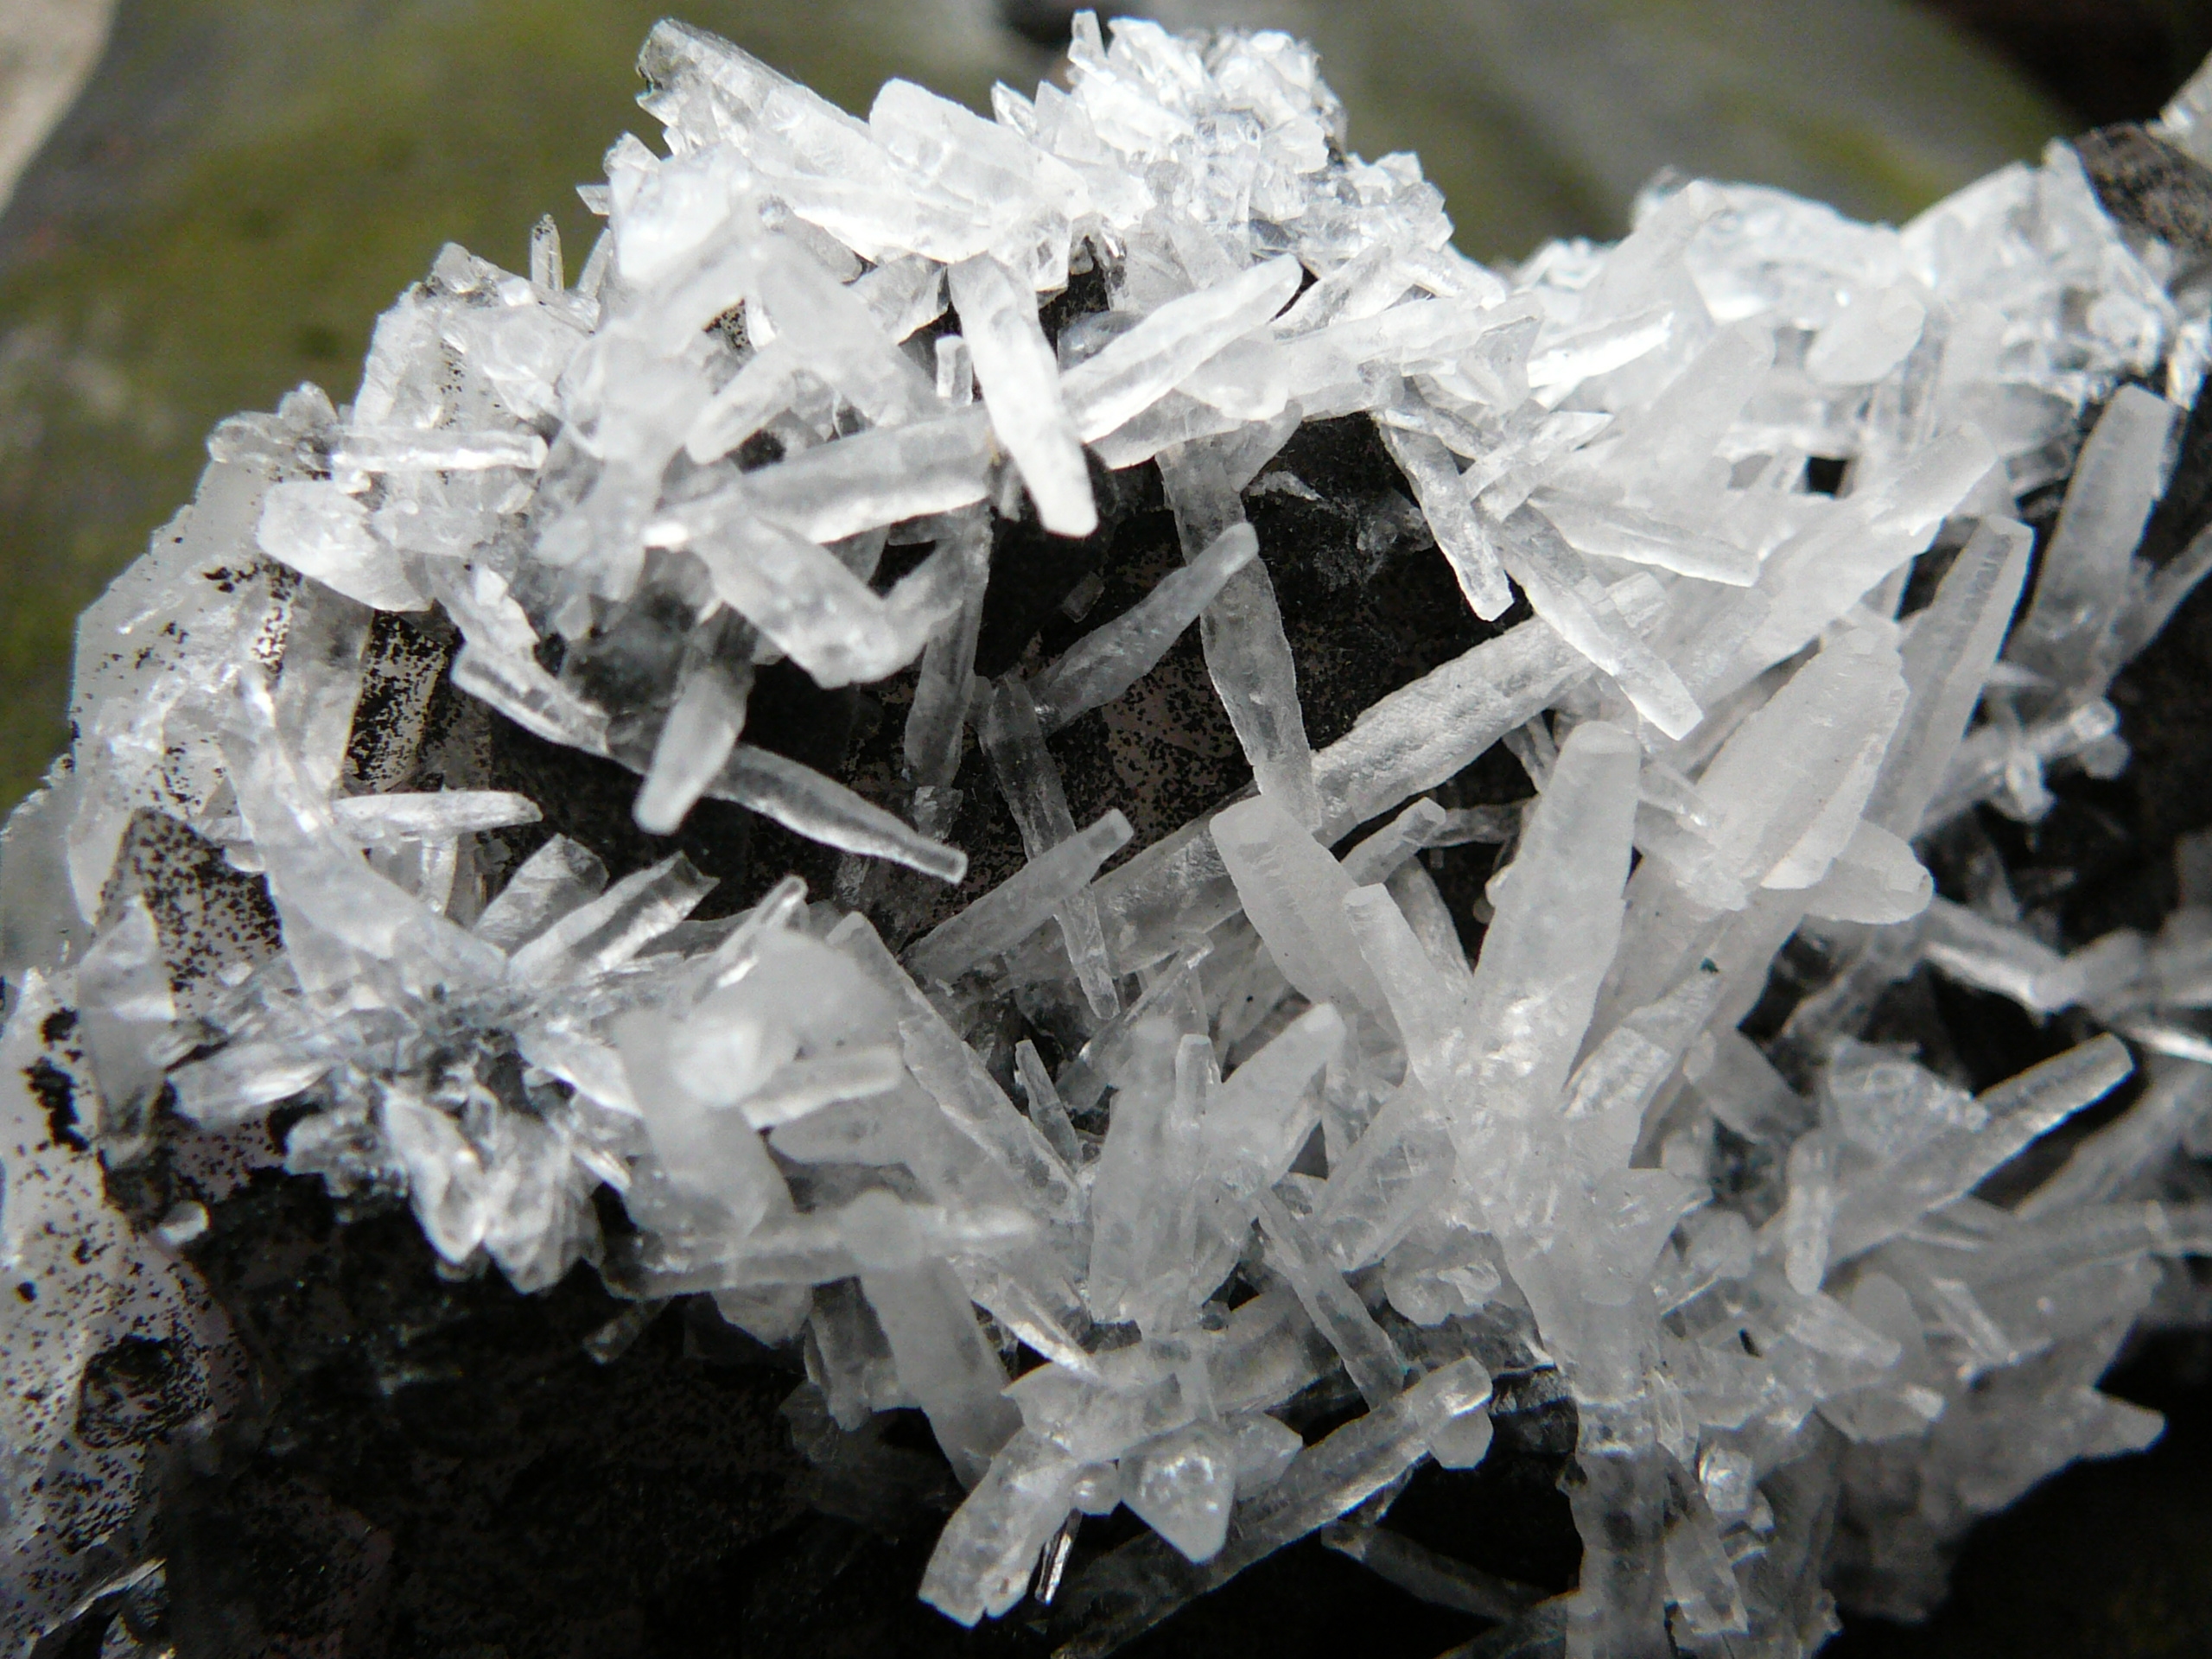 Calcite needles on a thin quartz layer (partly Amethyst)